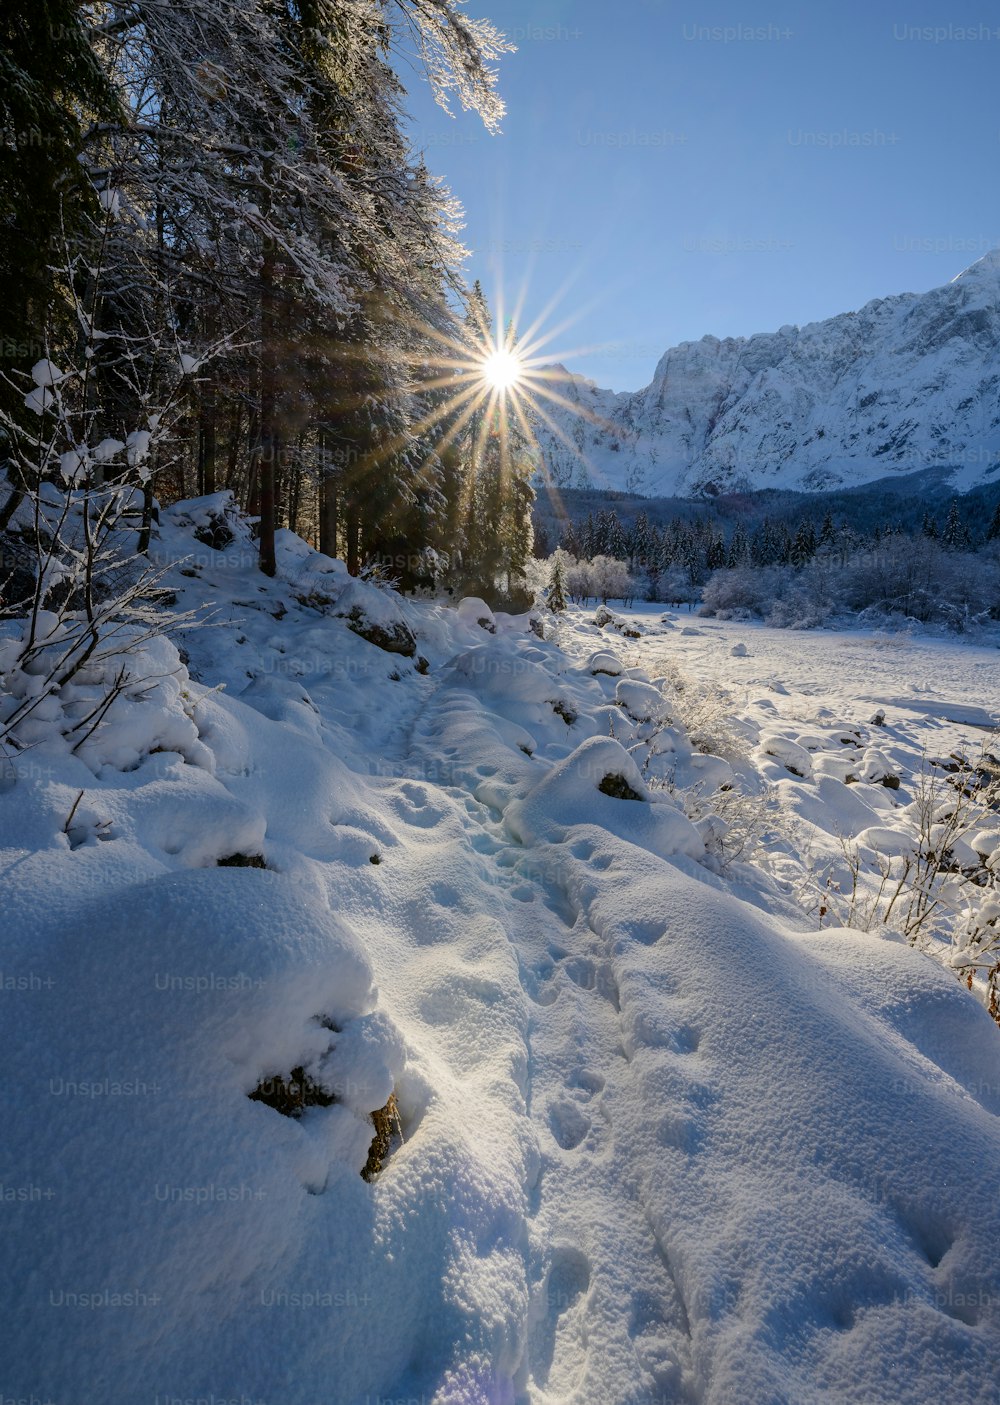 the sun shines brightly over a snowy path